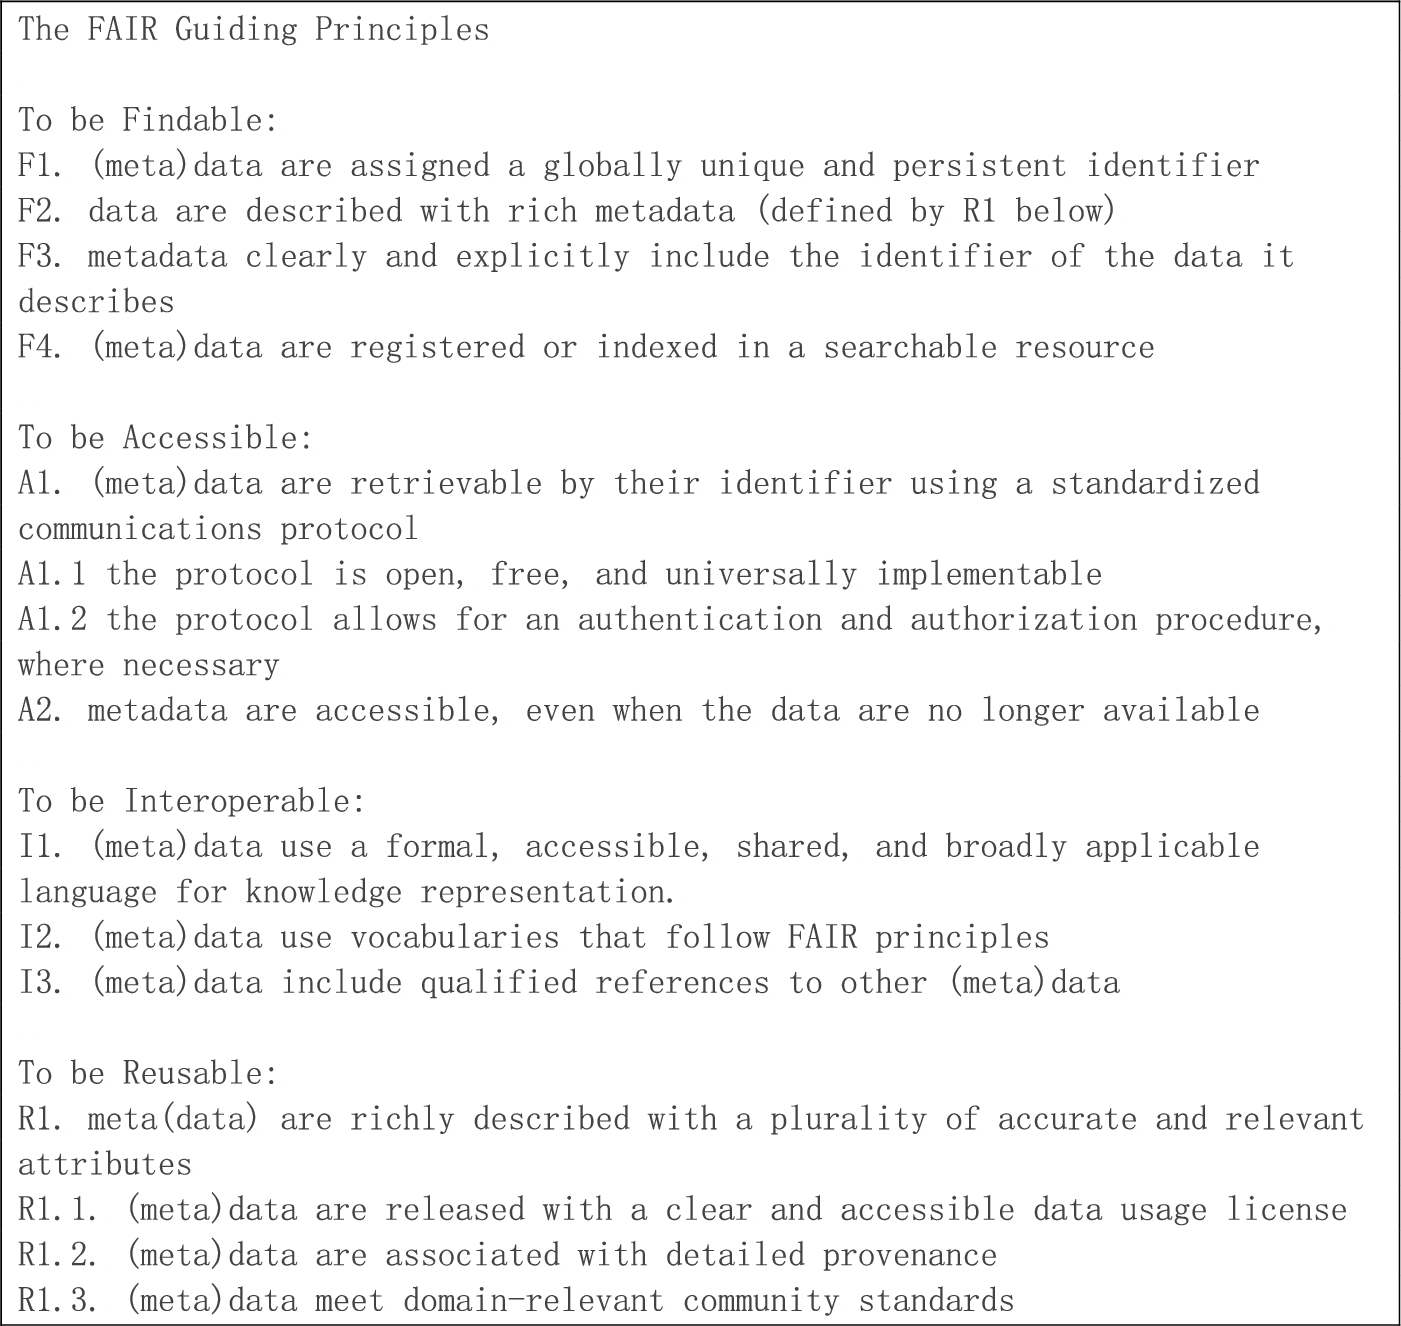 The FAIR guiding principles for scientific data management and stewardship [18].